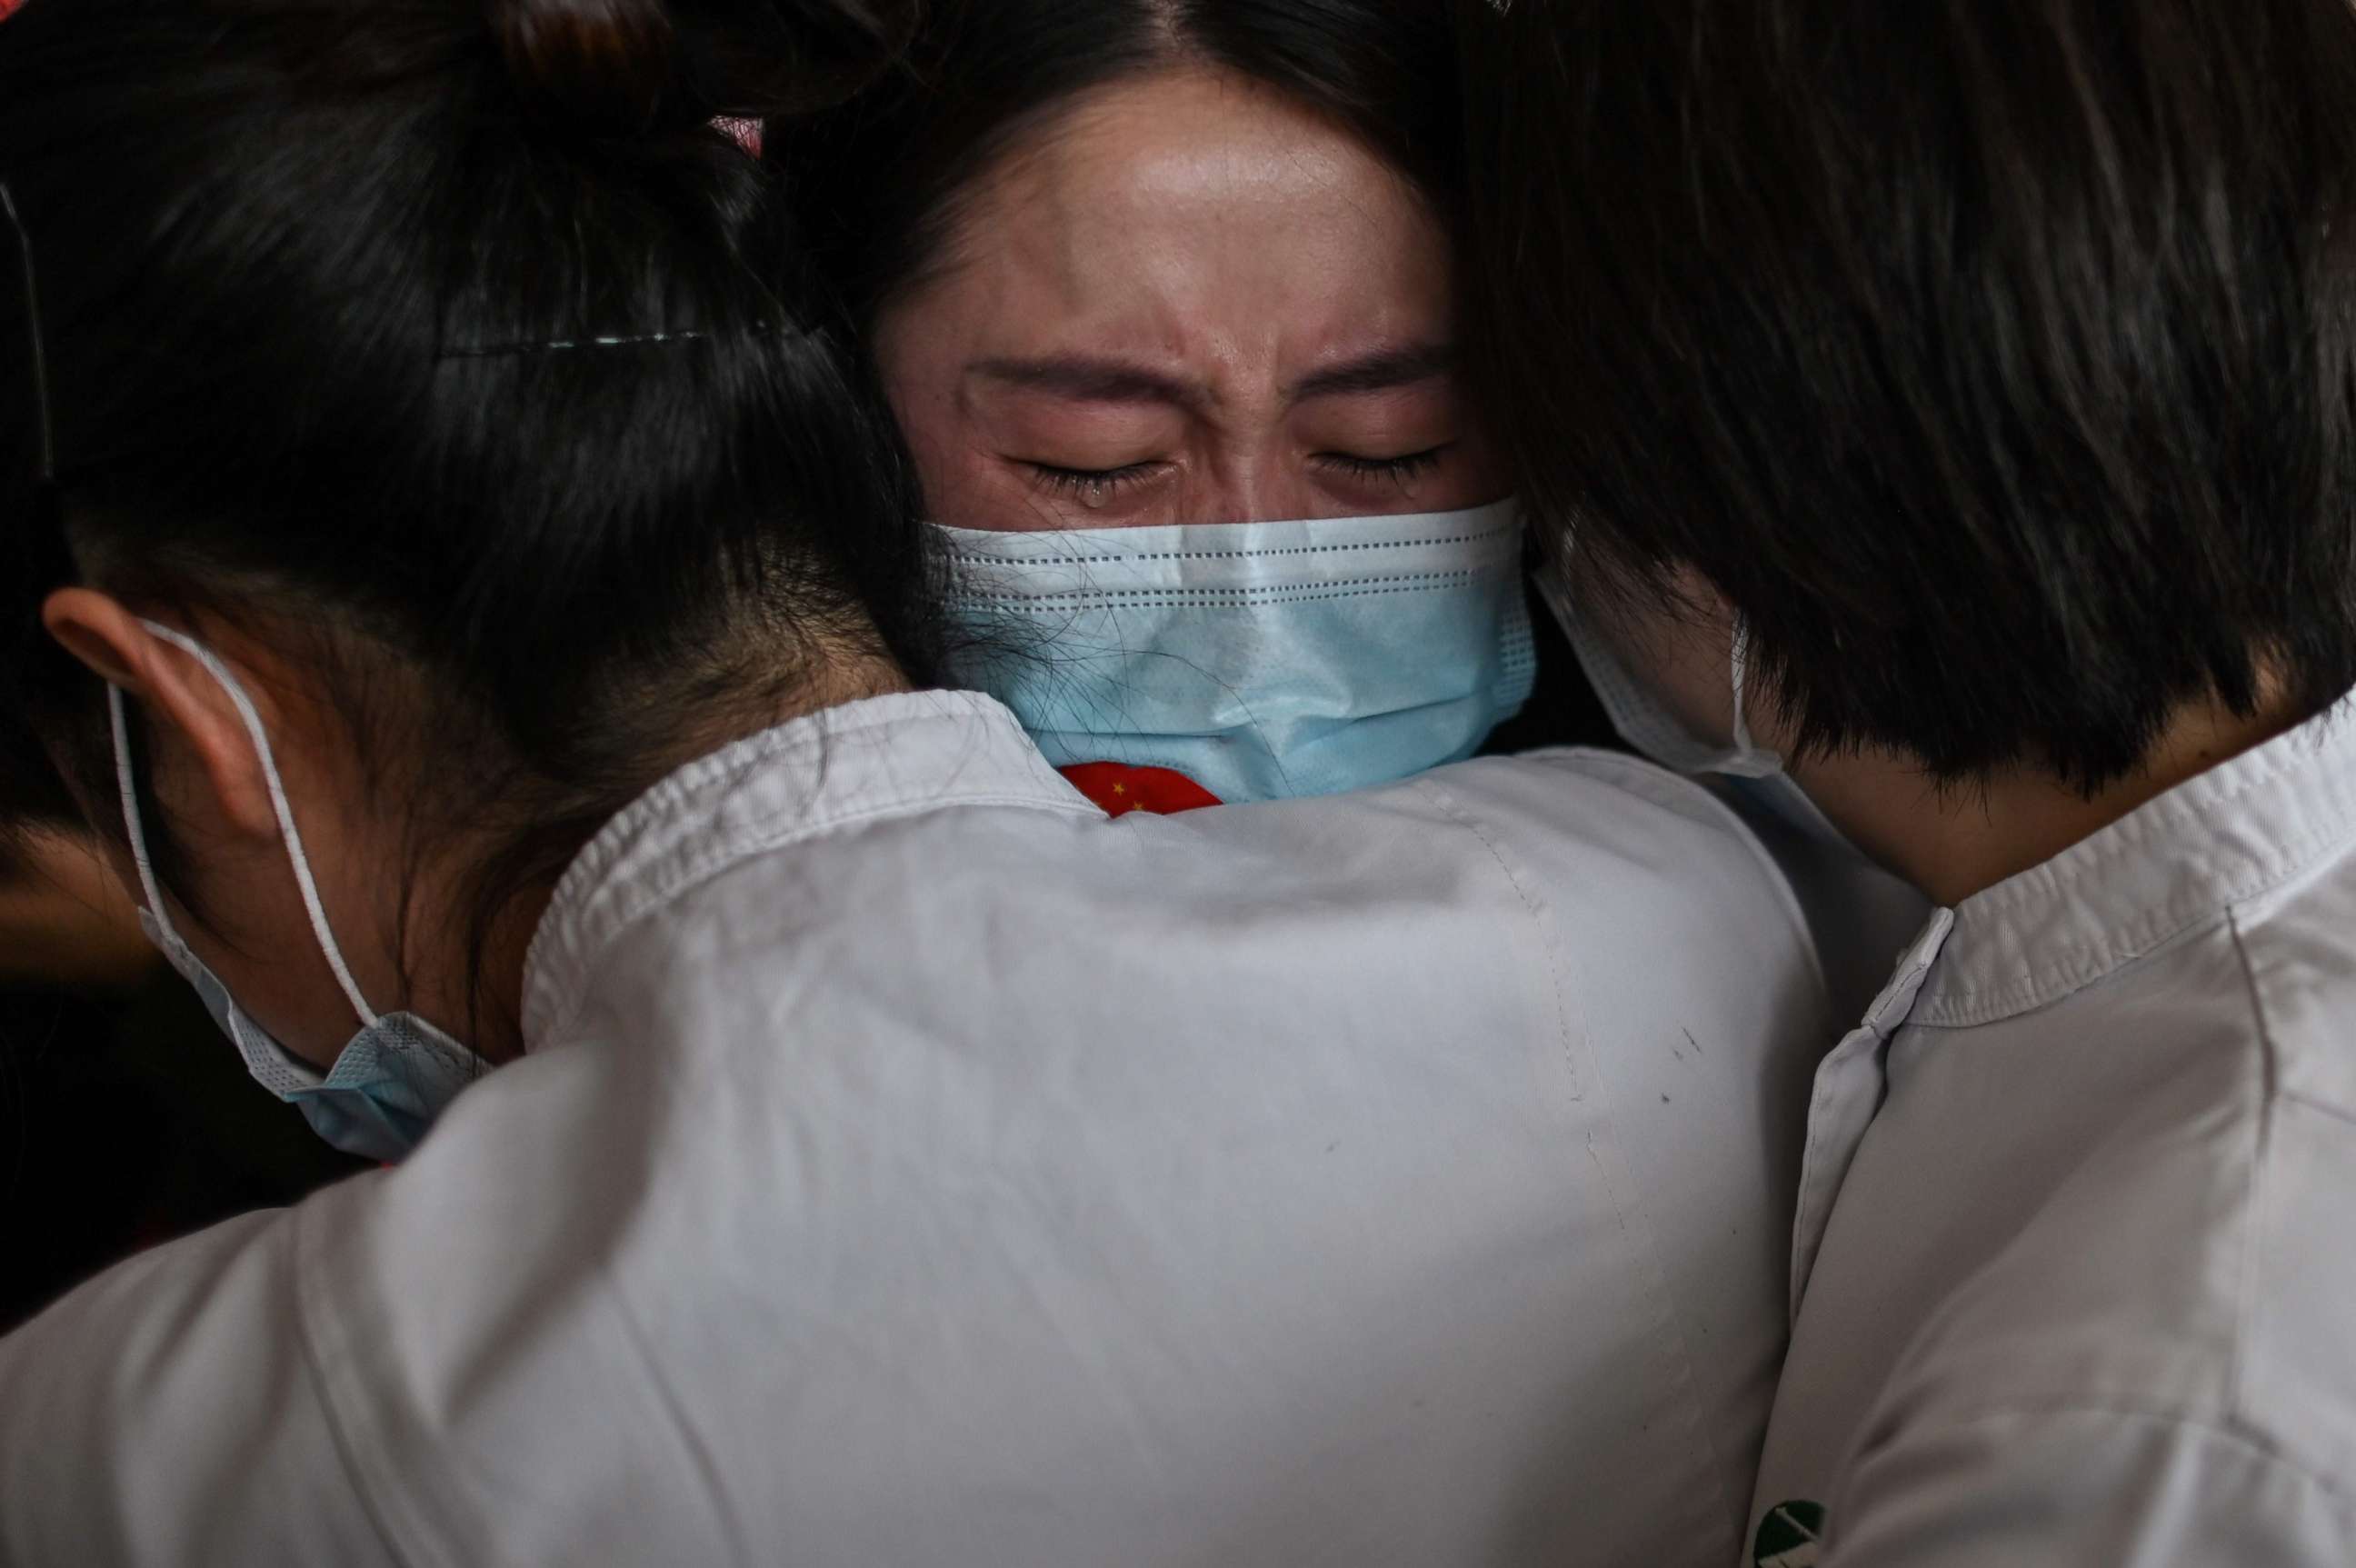 PHOTO: A medical worker from China's Jilin province (center) hugs nurses after working together during the coronavirus outbreak before leaving as Wuhan Tianhe International Airport is reopened in Wuhan in China's Hubei province on April 8, 2020.